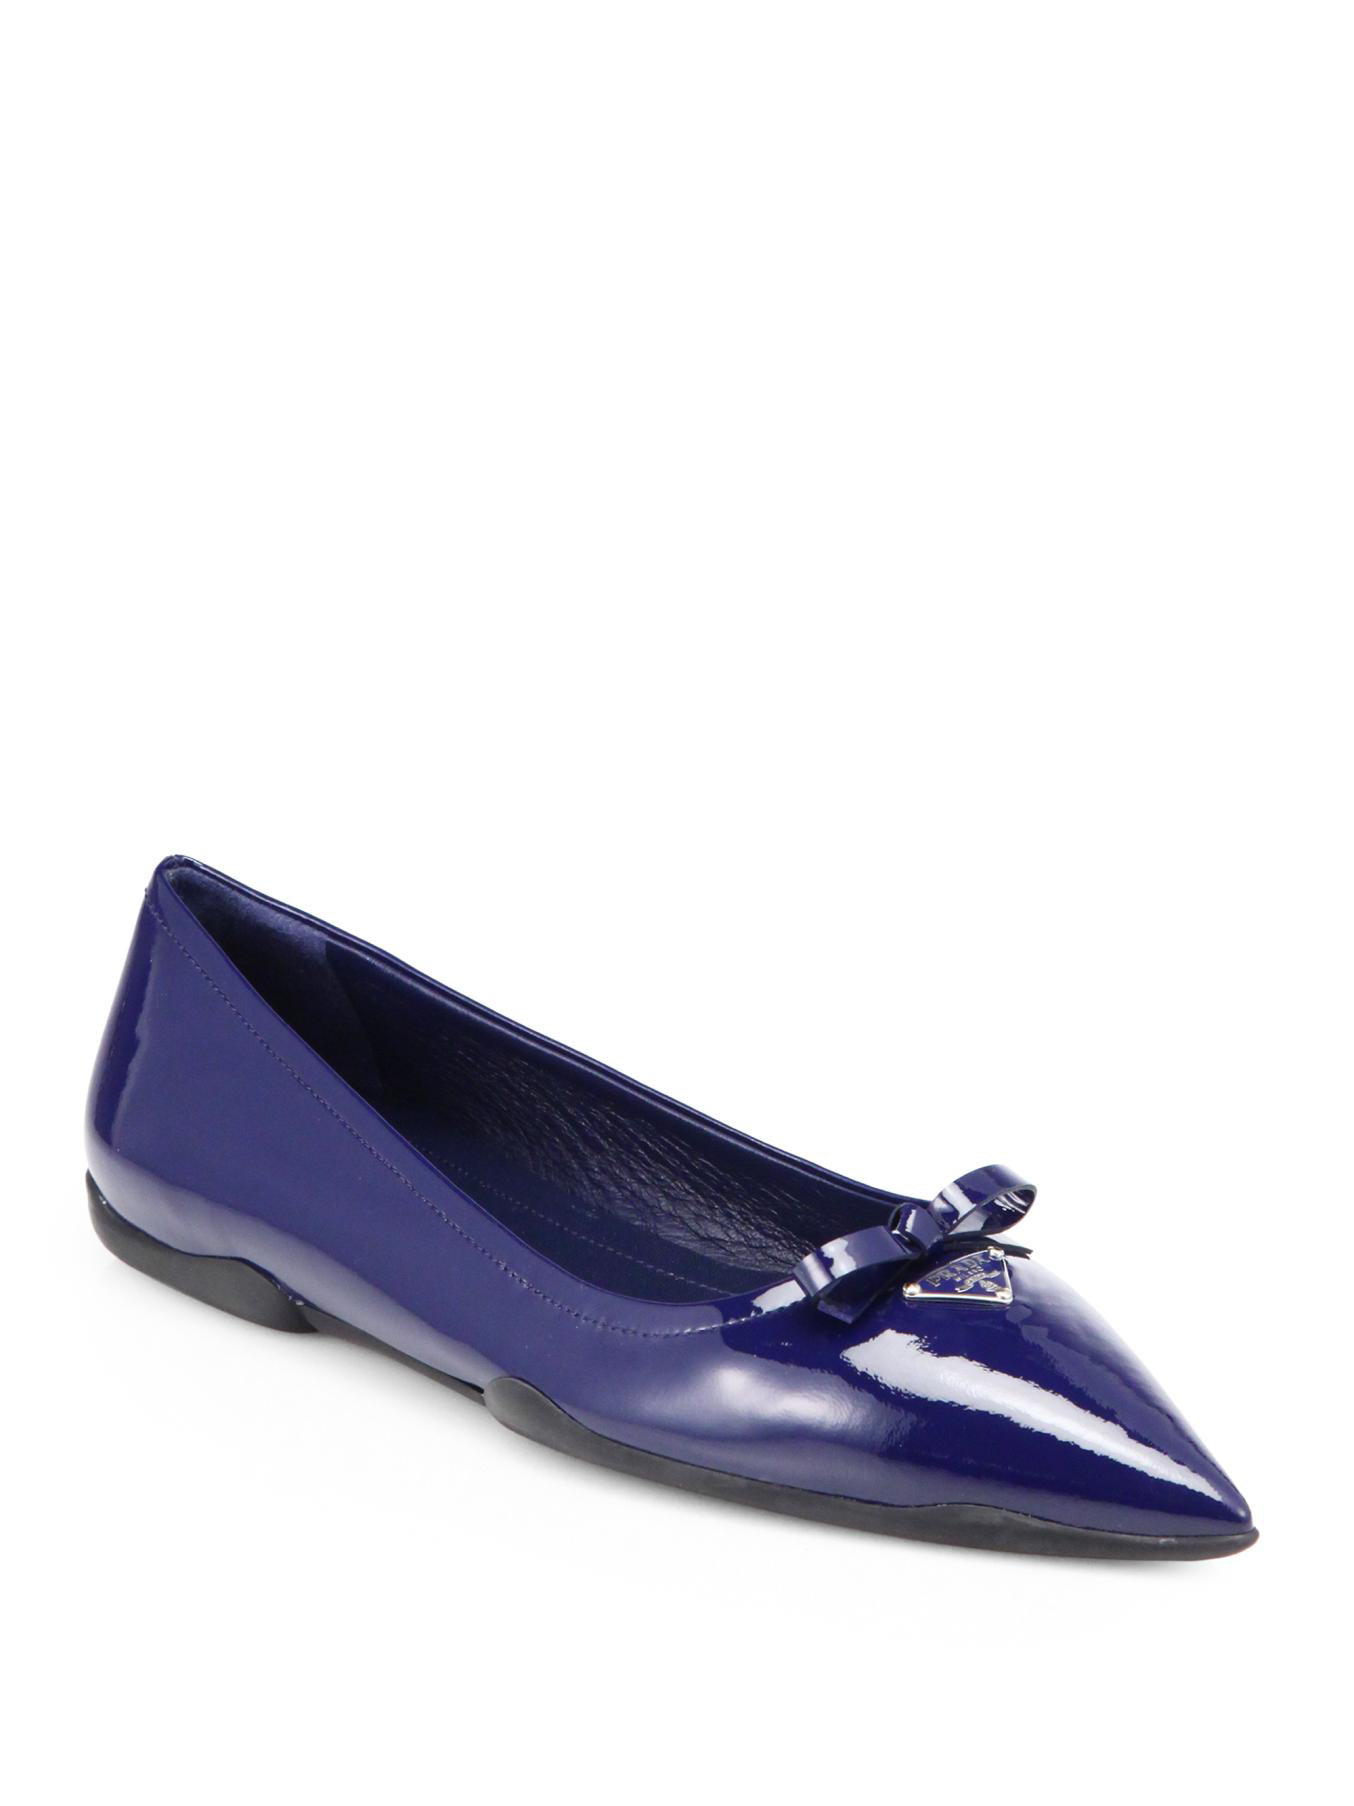 Lyst - Prada Patent Leather Pointtoe Ballet Flats in Blue